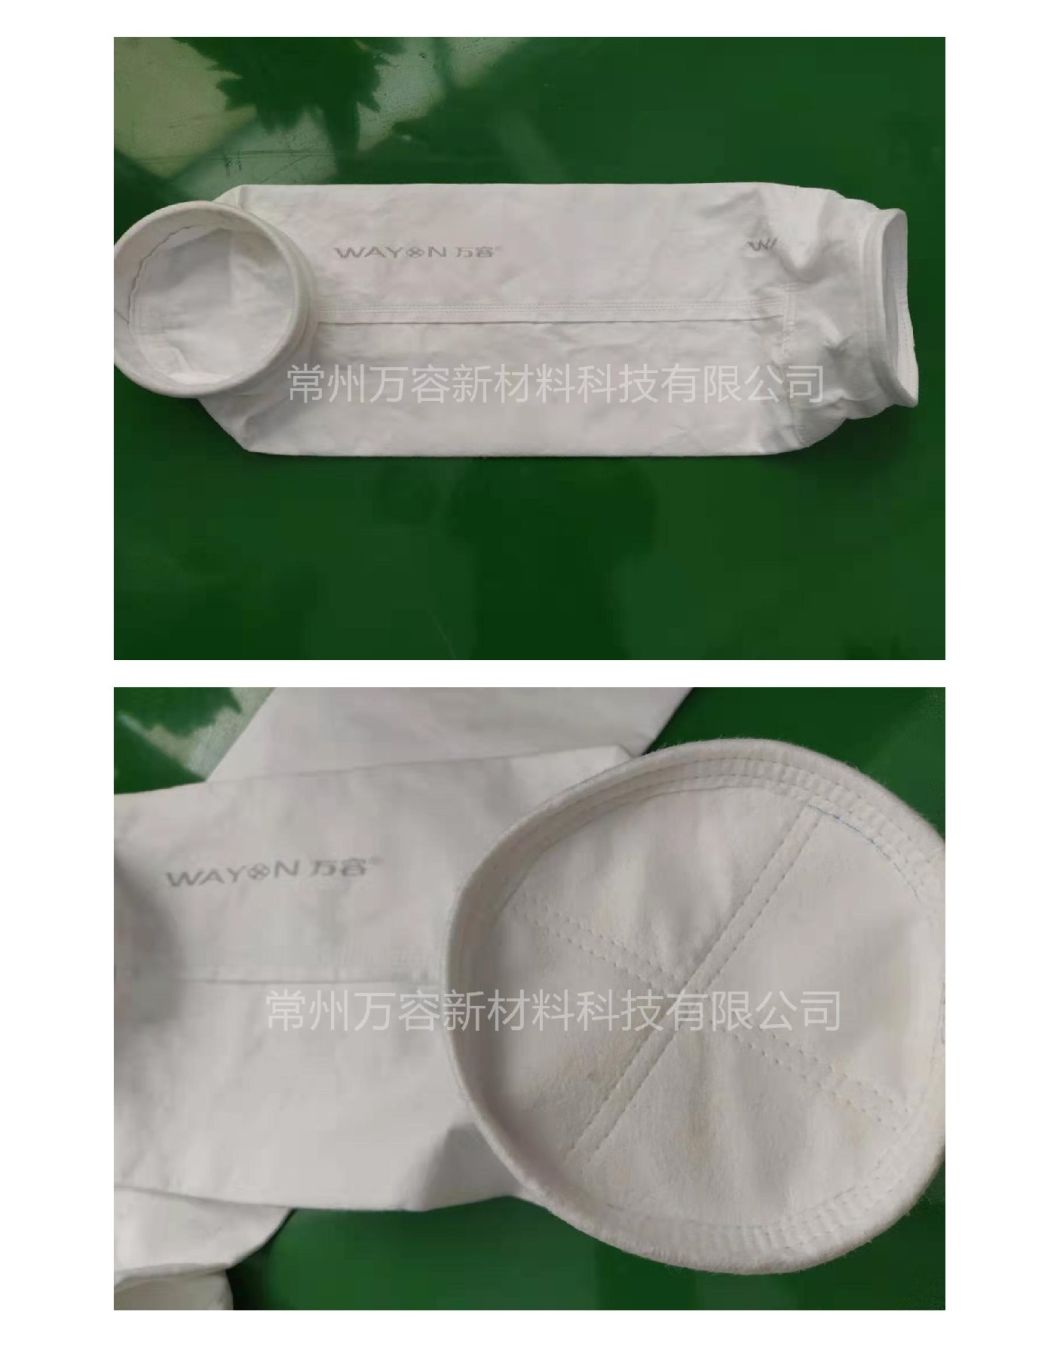 PTFE Filter Bag for High Temperature Air Filtration